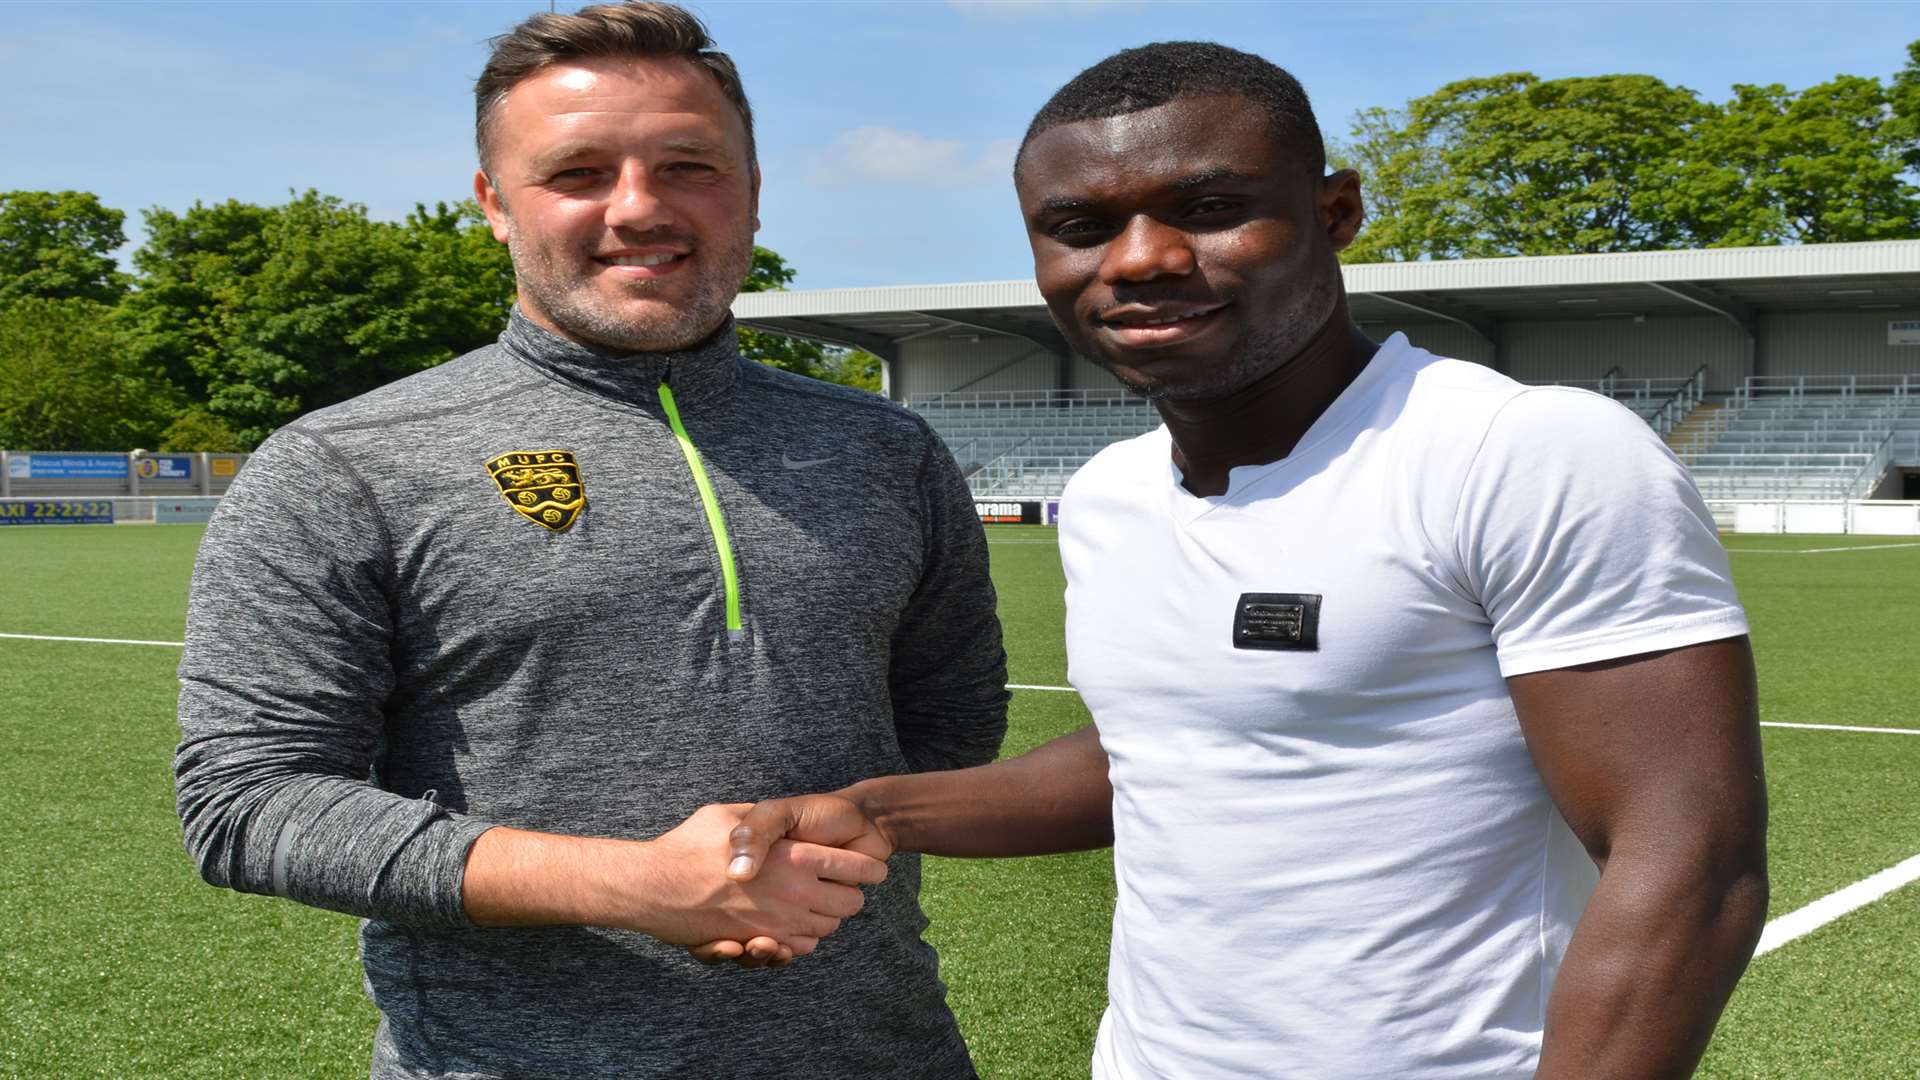 Done deal between Jay Saunders and Seth Twumasi